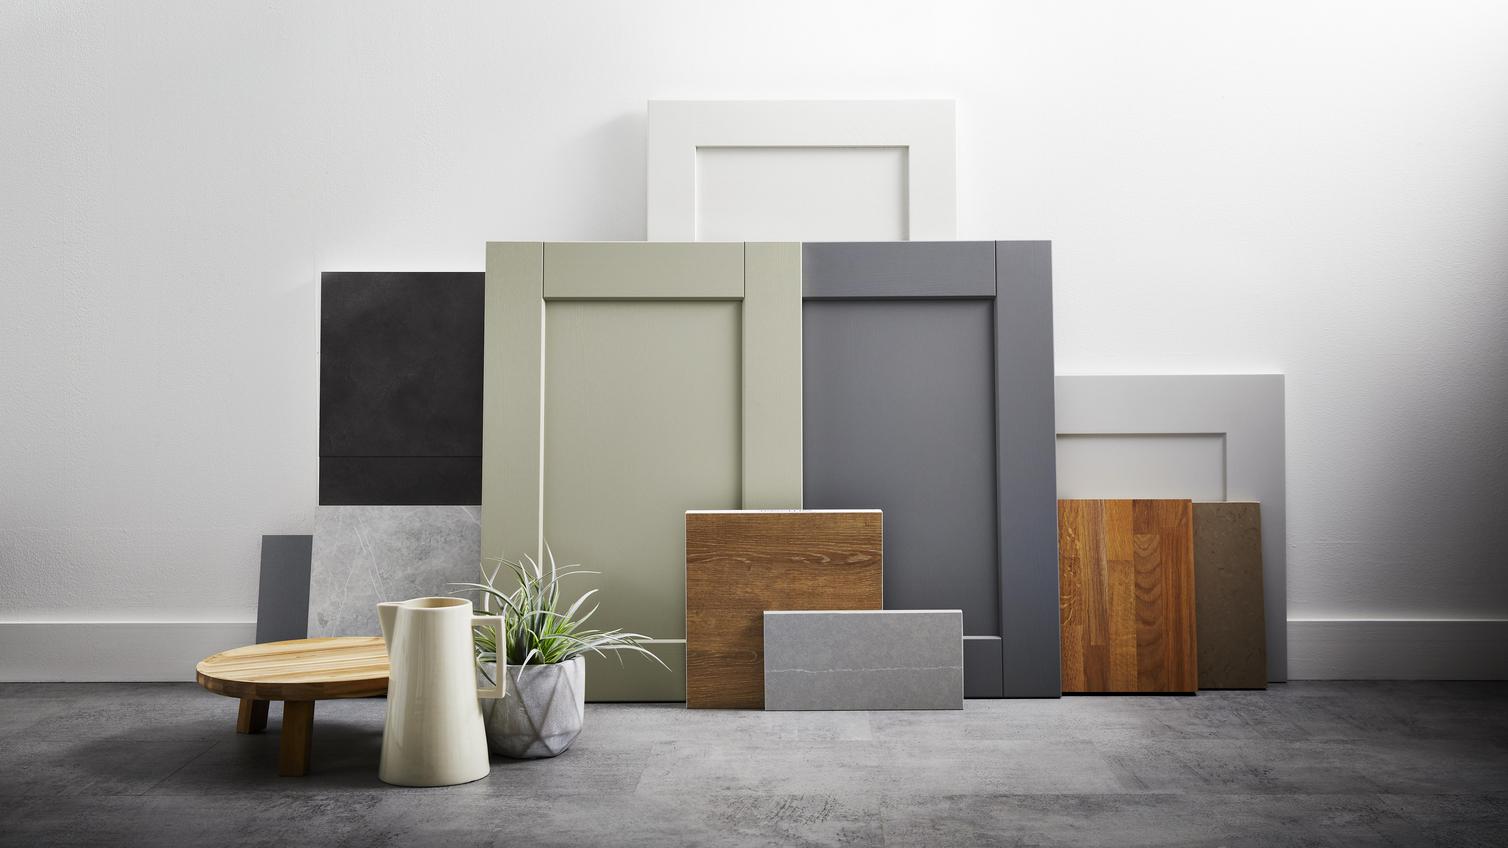 Shaker kitchen doors and boards in natural hues, like green, oak, and white on a grey floor. Propped up against a white wall.